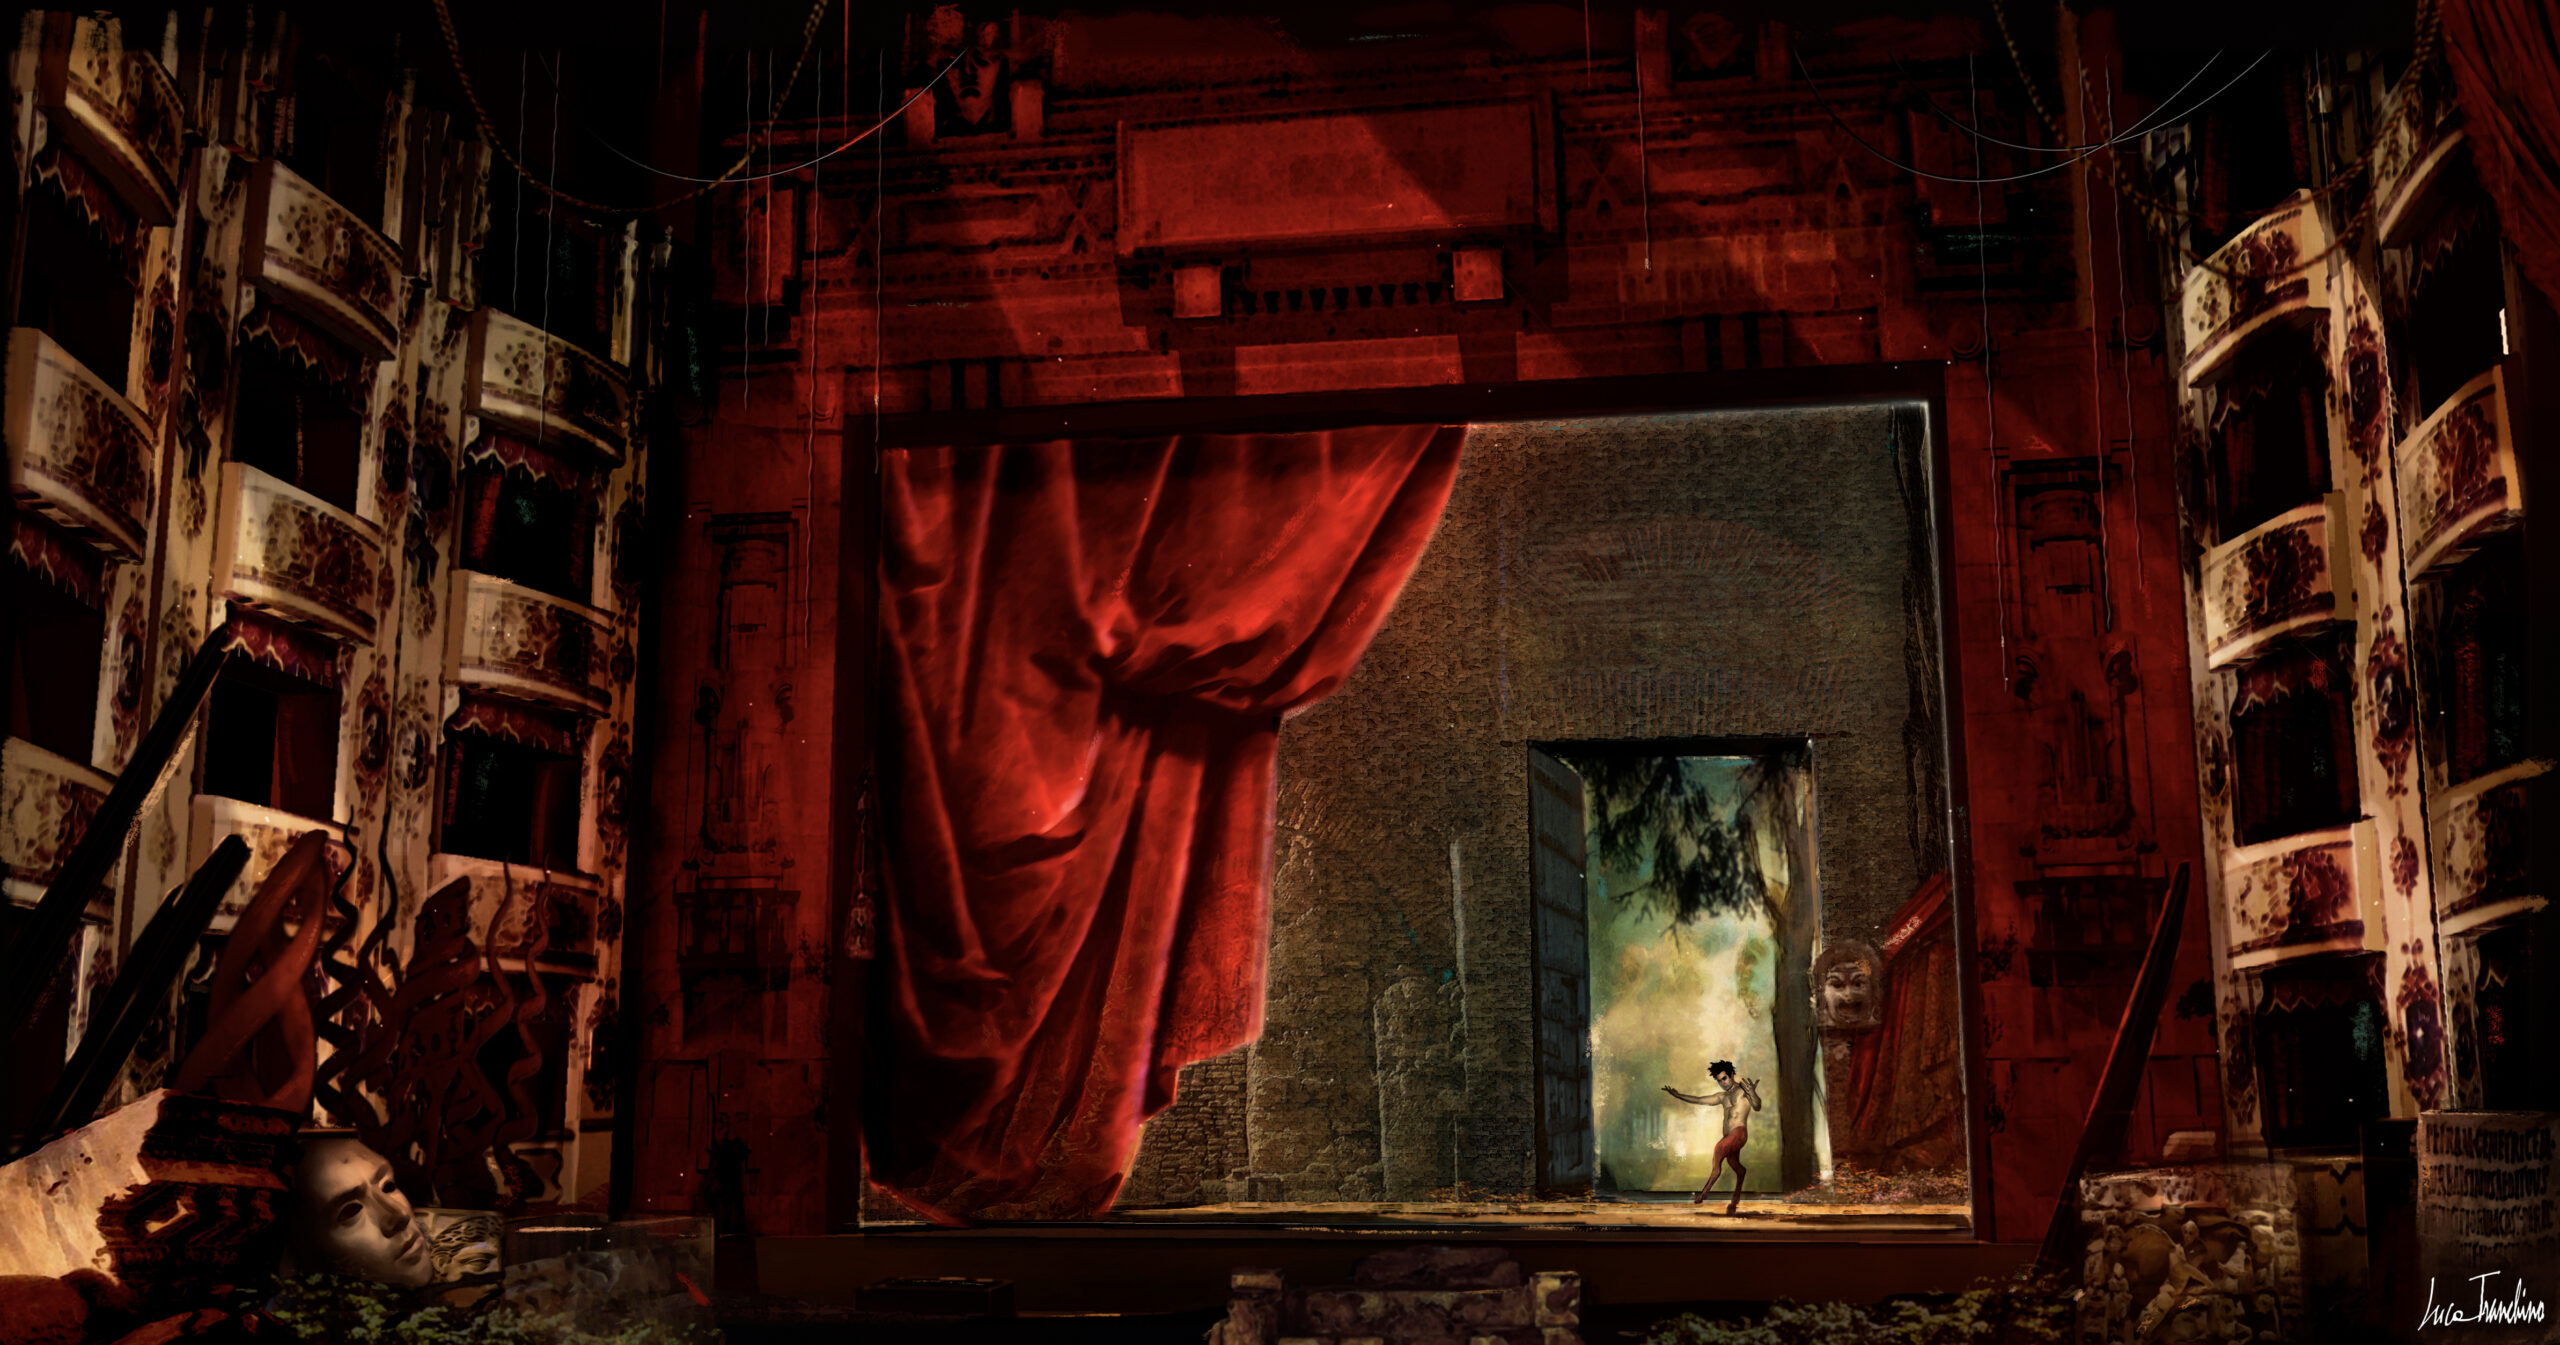 “Int. Theatre”, Concept Art by Luca Tranchino - ©2009 - Mixed Media